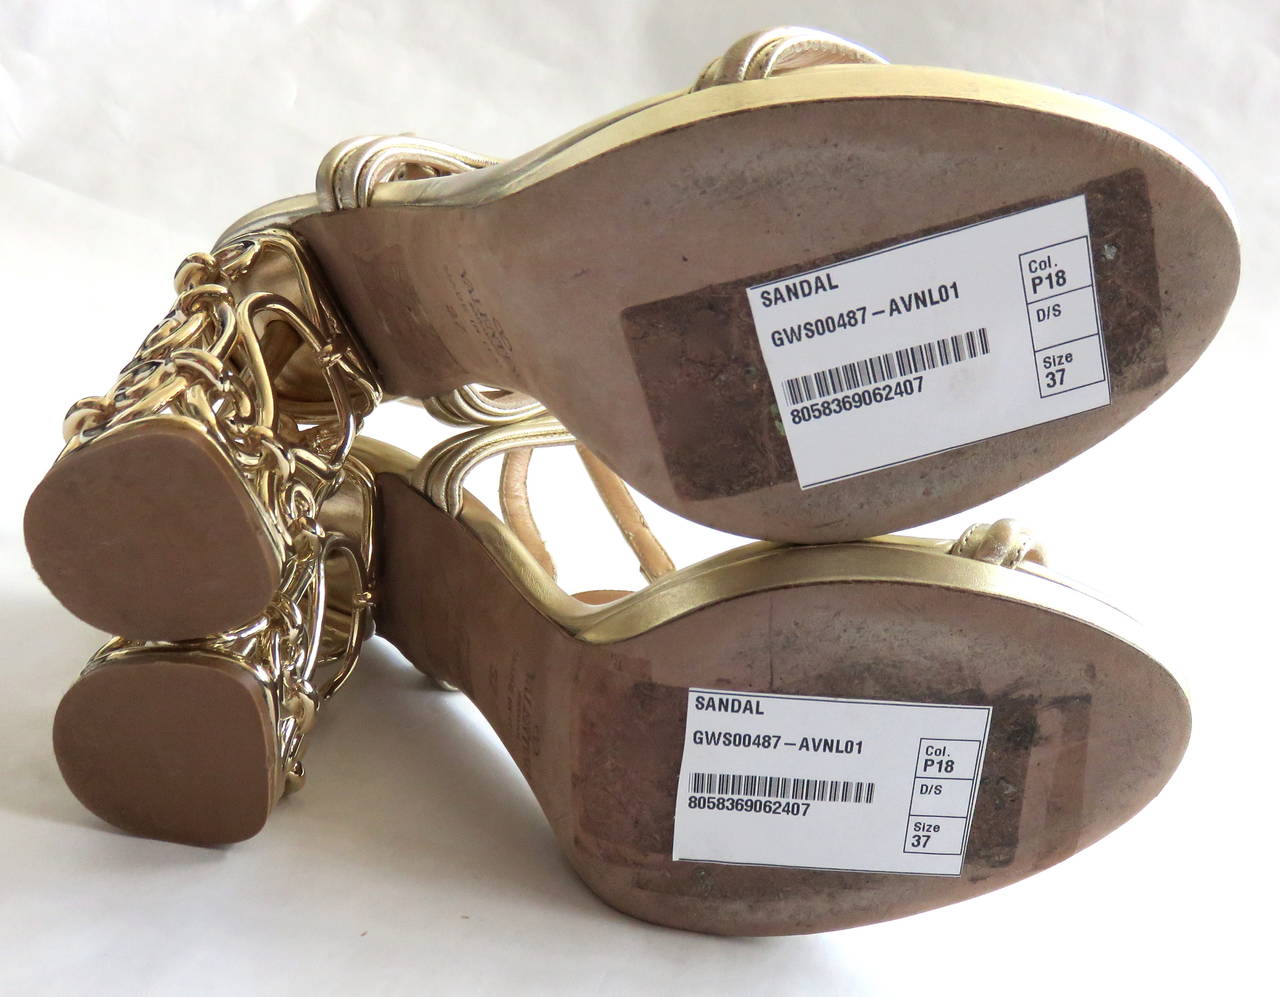 VALENTINO Metallic gold leather & metal cage heels shoes 6